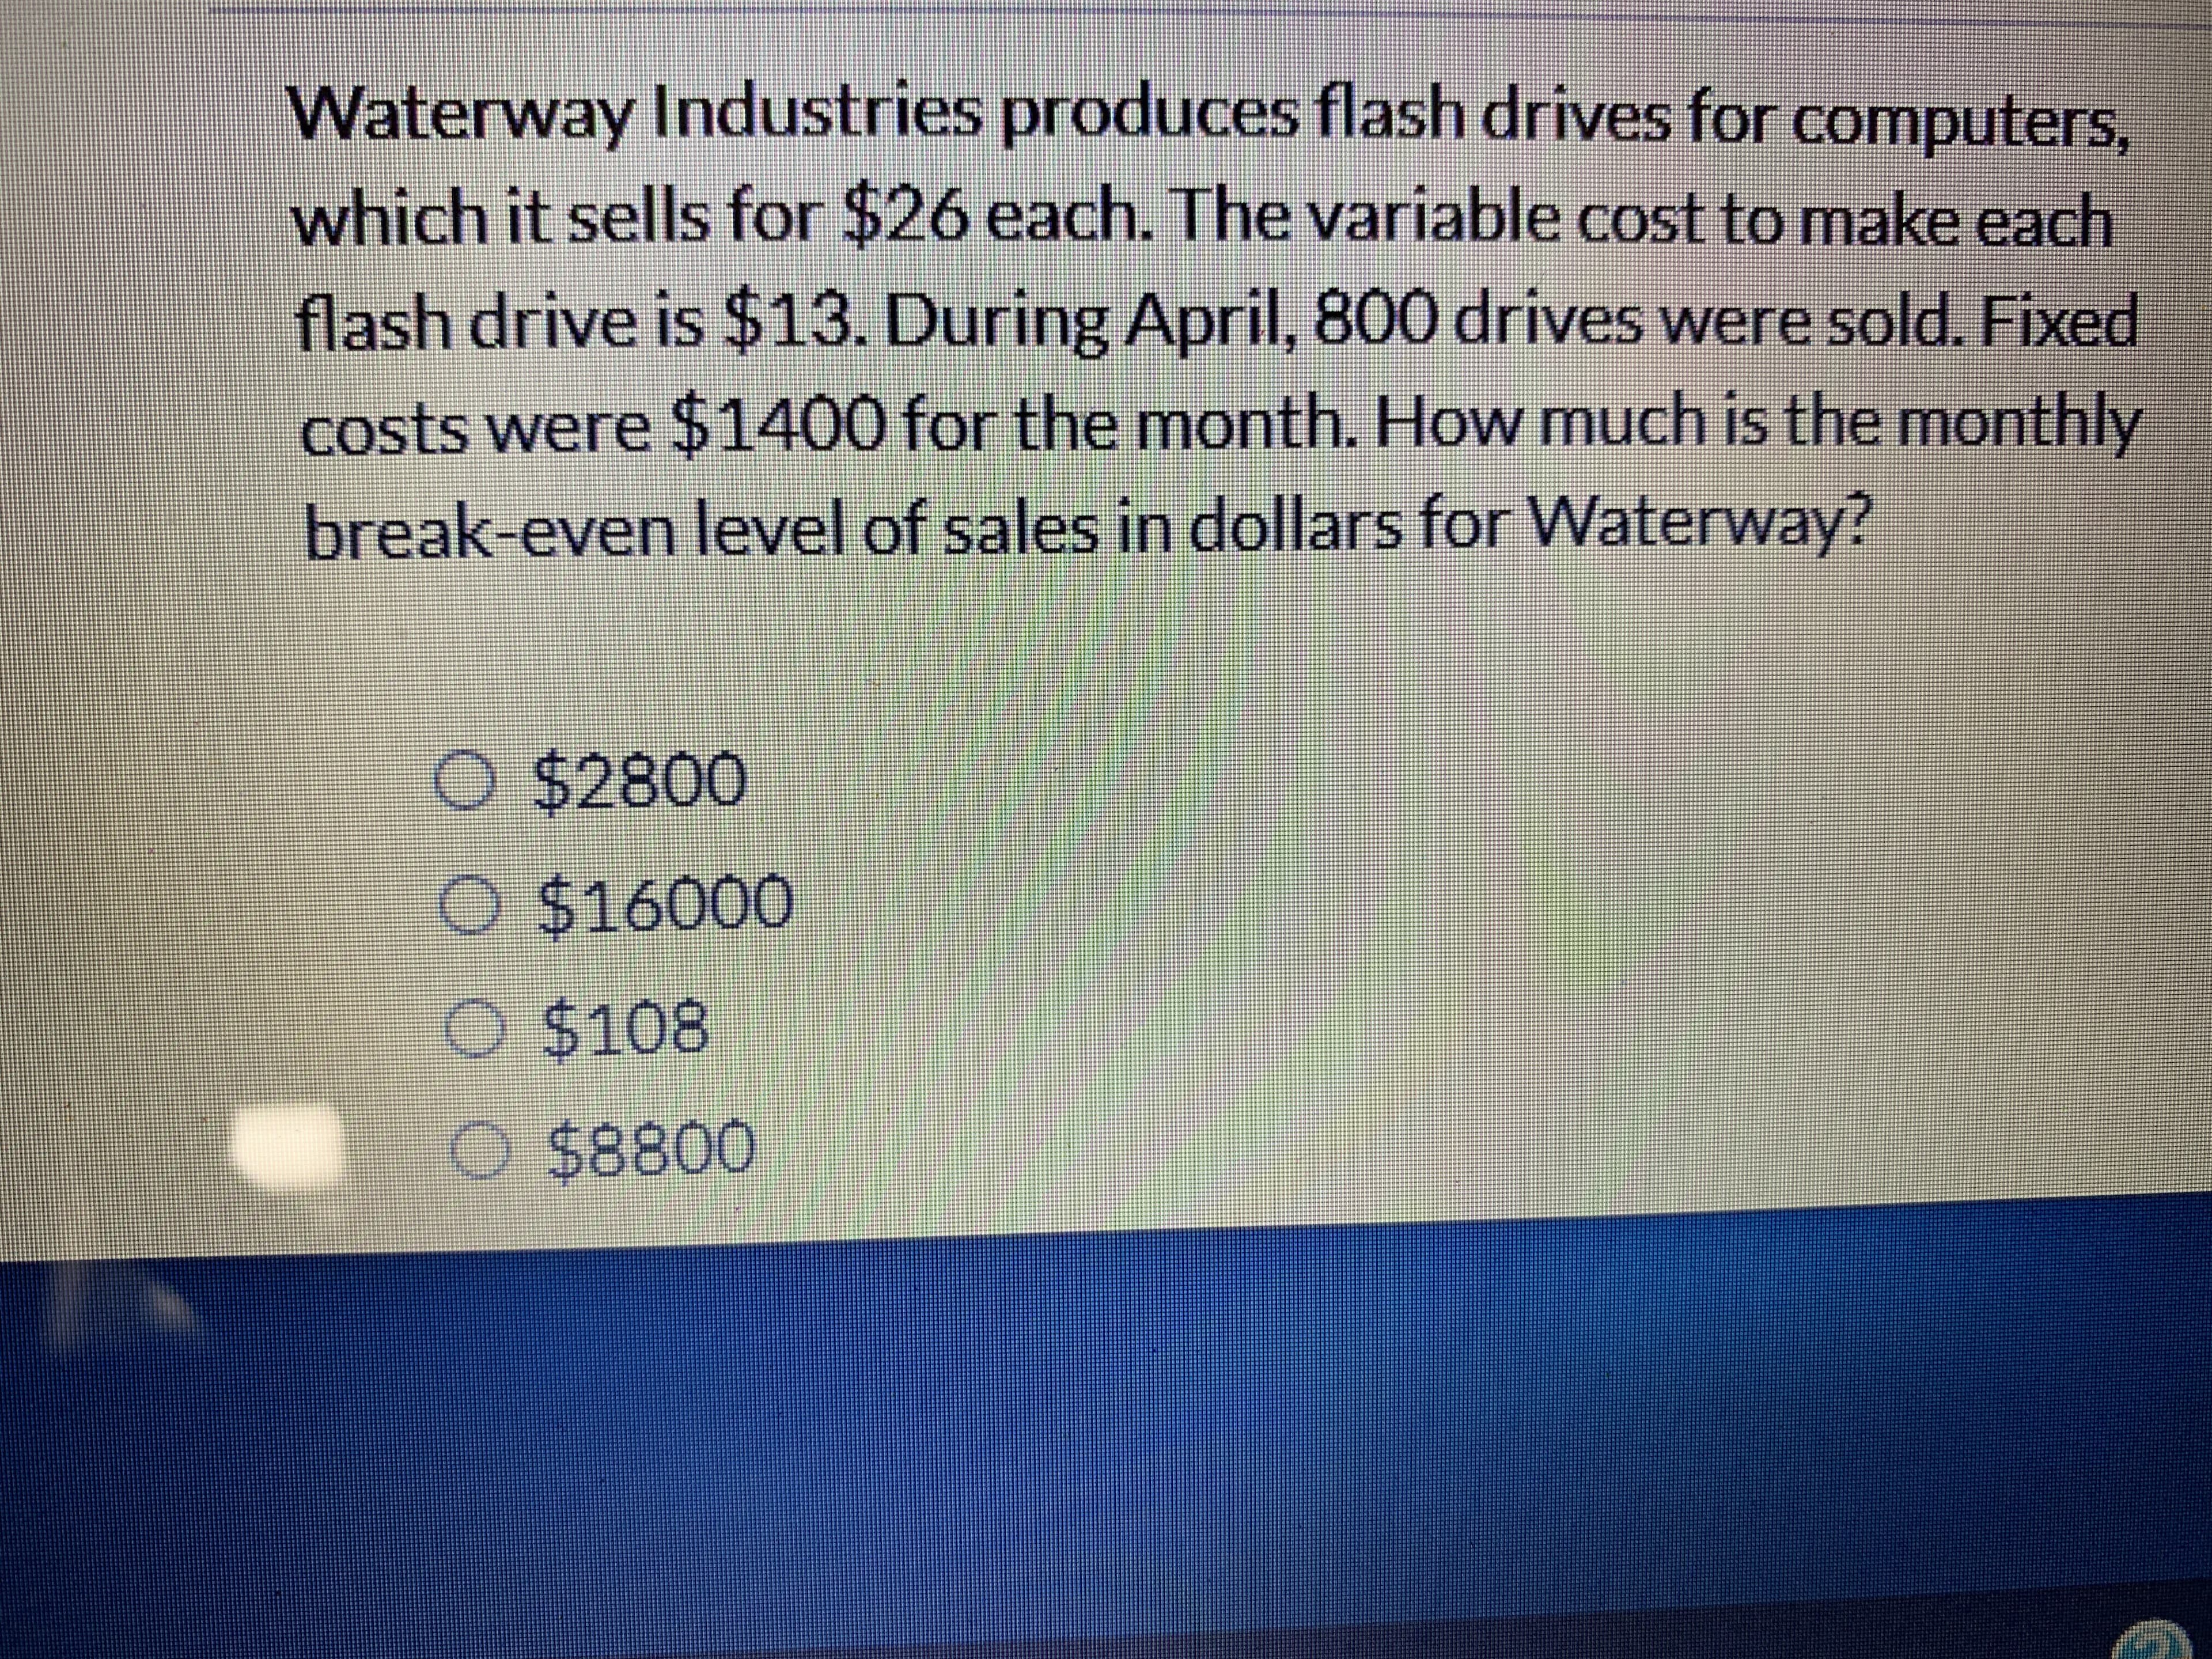 Waterway Industries produces flash drives for computers,
which it sells for $26 each. The variable cost to make each
flash drive is $13. During April, 800 drives were sold. Fixed
costs were $1400 for the month. How much is the monthly
break-even level of salles in dollars for Waterway?
O $2800
O $16000
O $108
$8800
